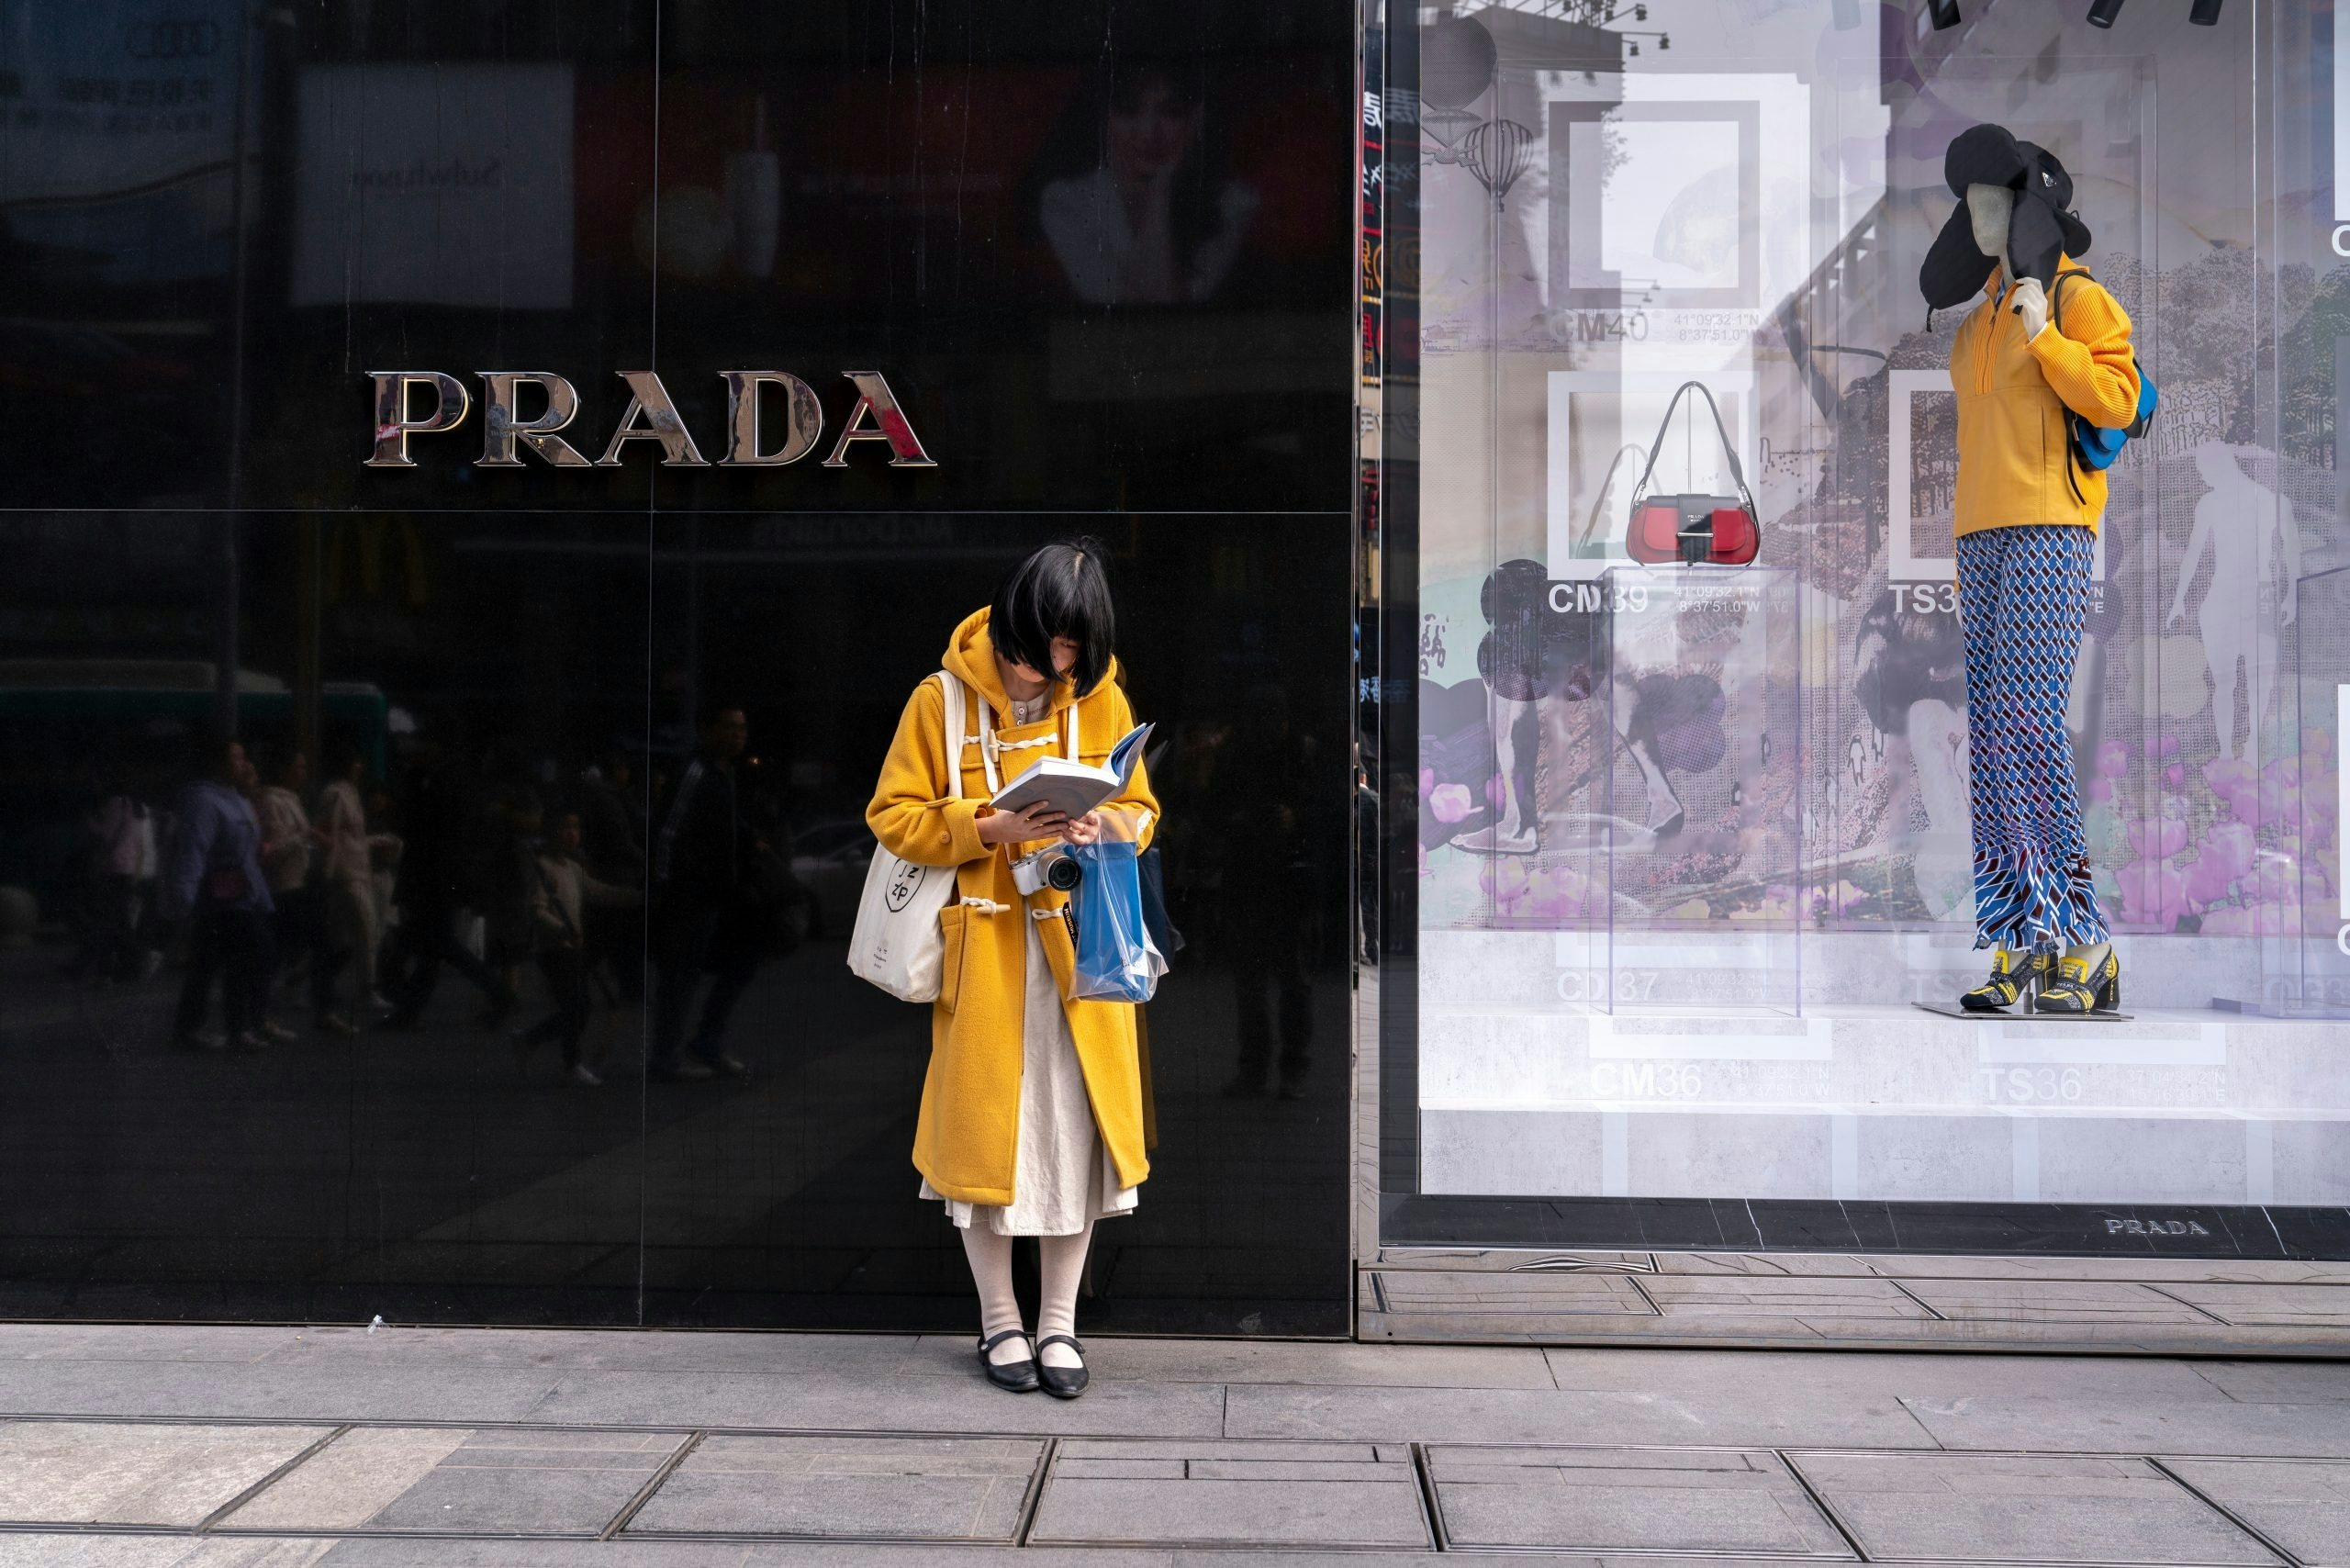 As of January 2021, the UK stopped operating tax-free shopping which has naturally impacted the appeal for Chinese tourists. Photo: Shutterstock